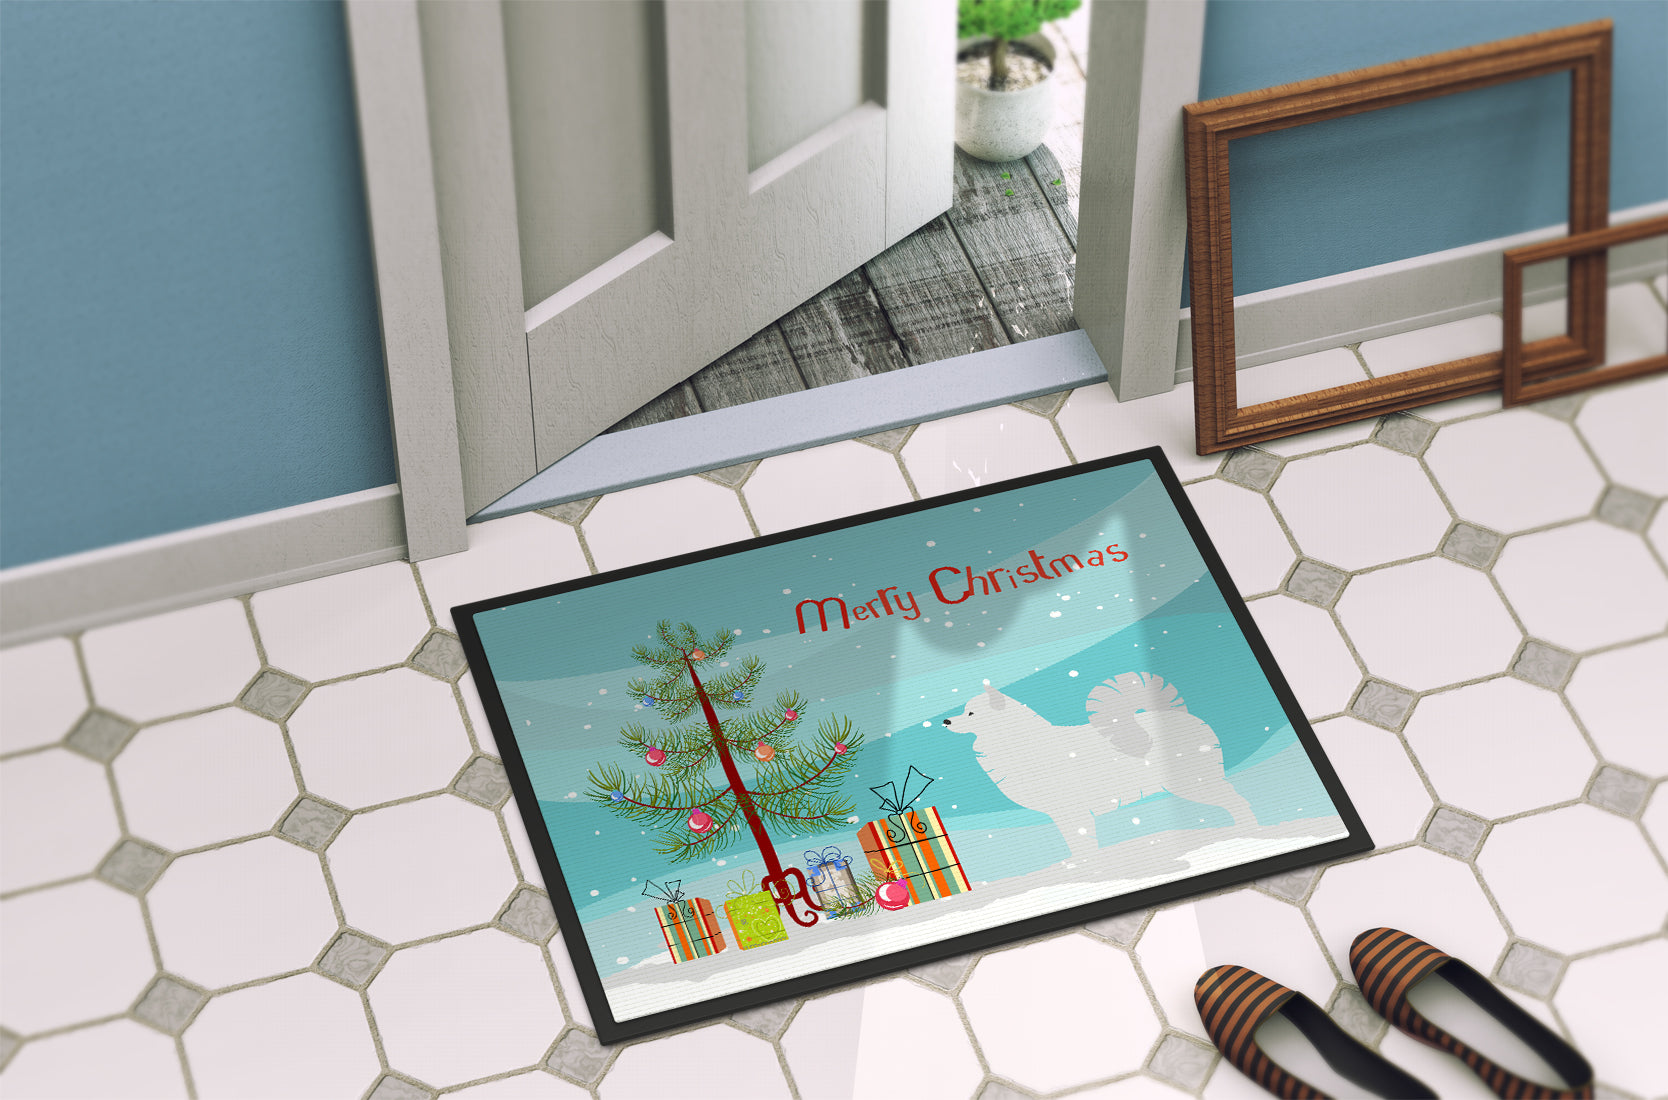 Samoyed Merry Christmas Tree Indoor or Outdoor Mat 18x27 BB2977MAT - the-store.com